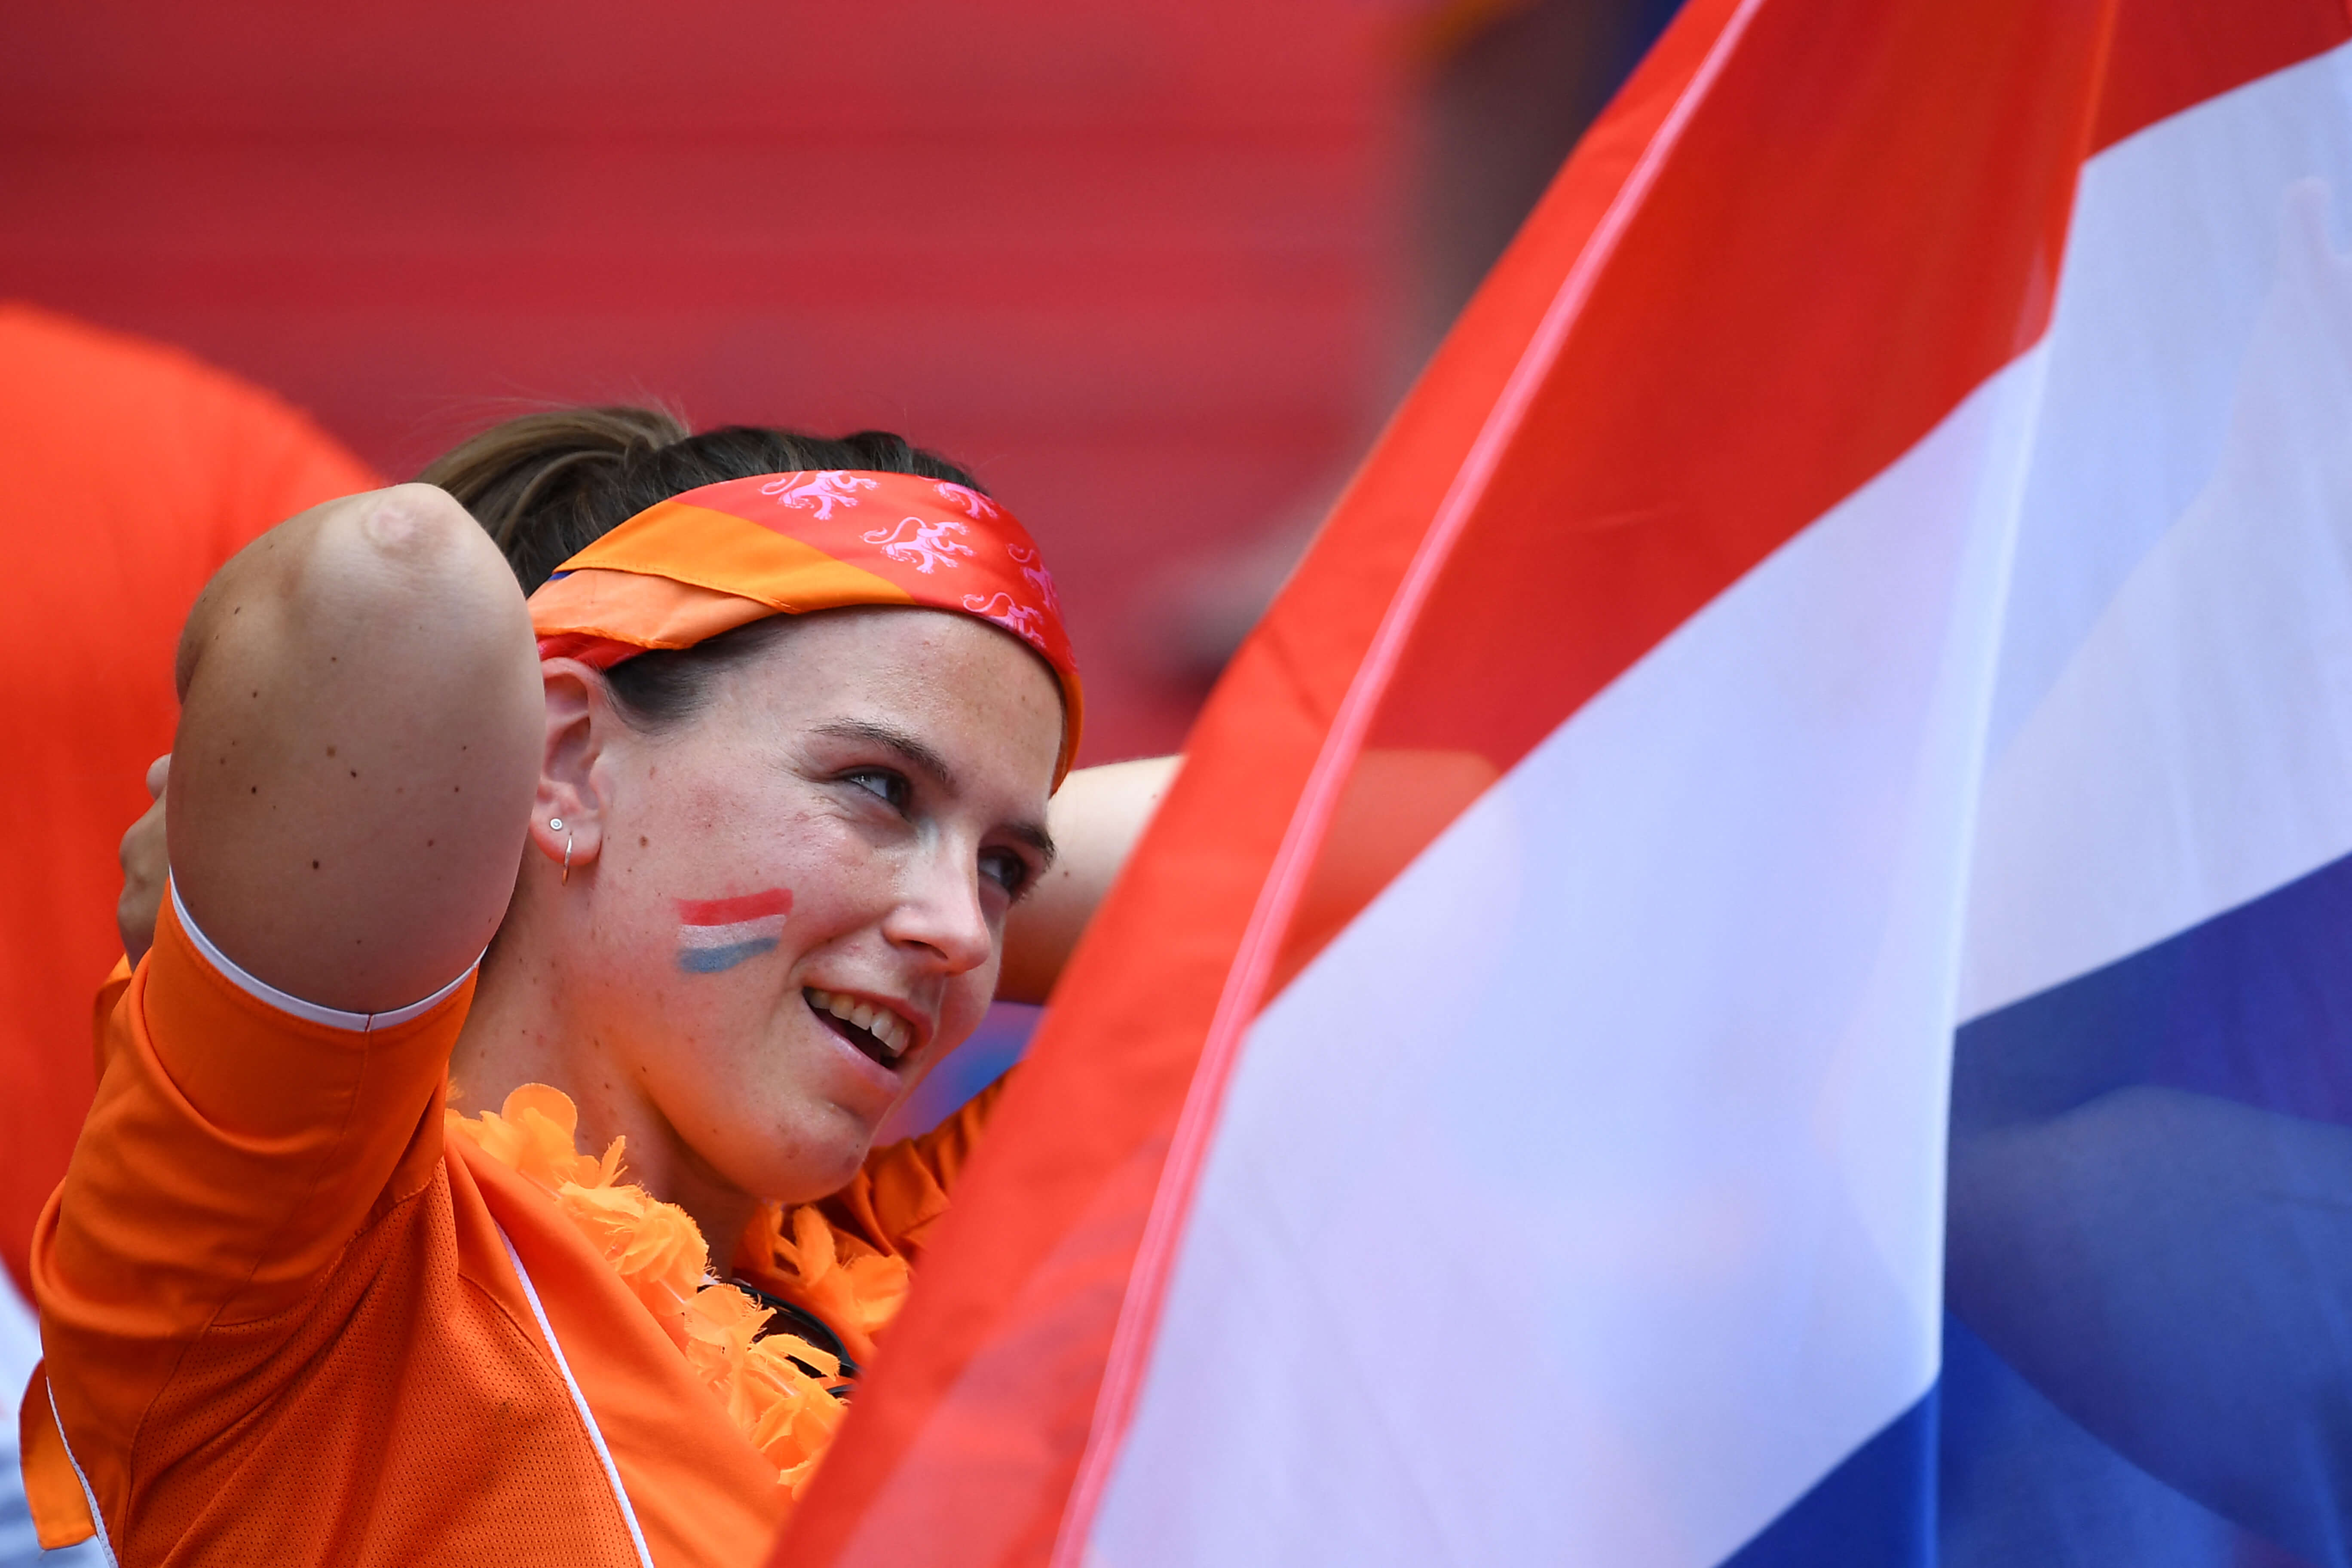 Studying in the Netherlands? Consider applying for the Holland Scholarship